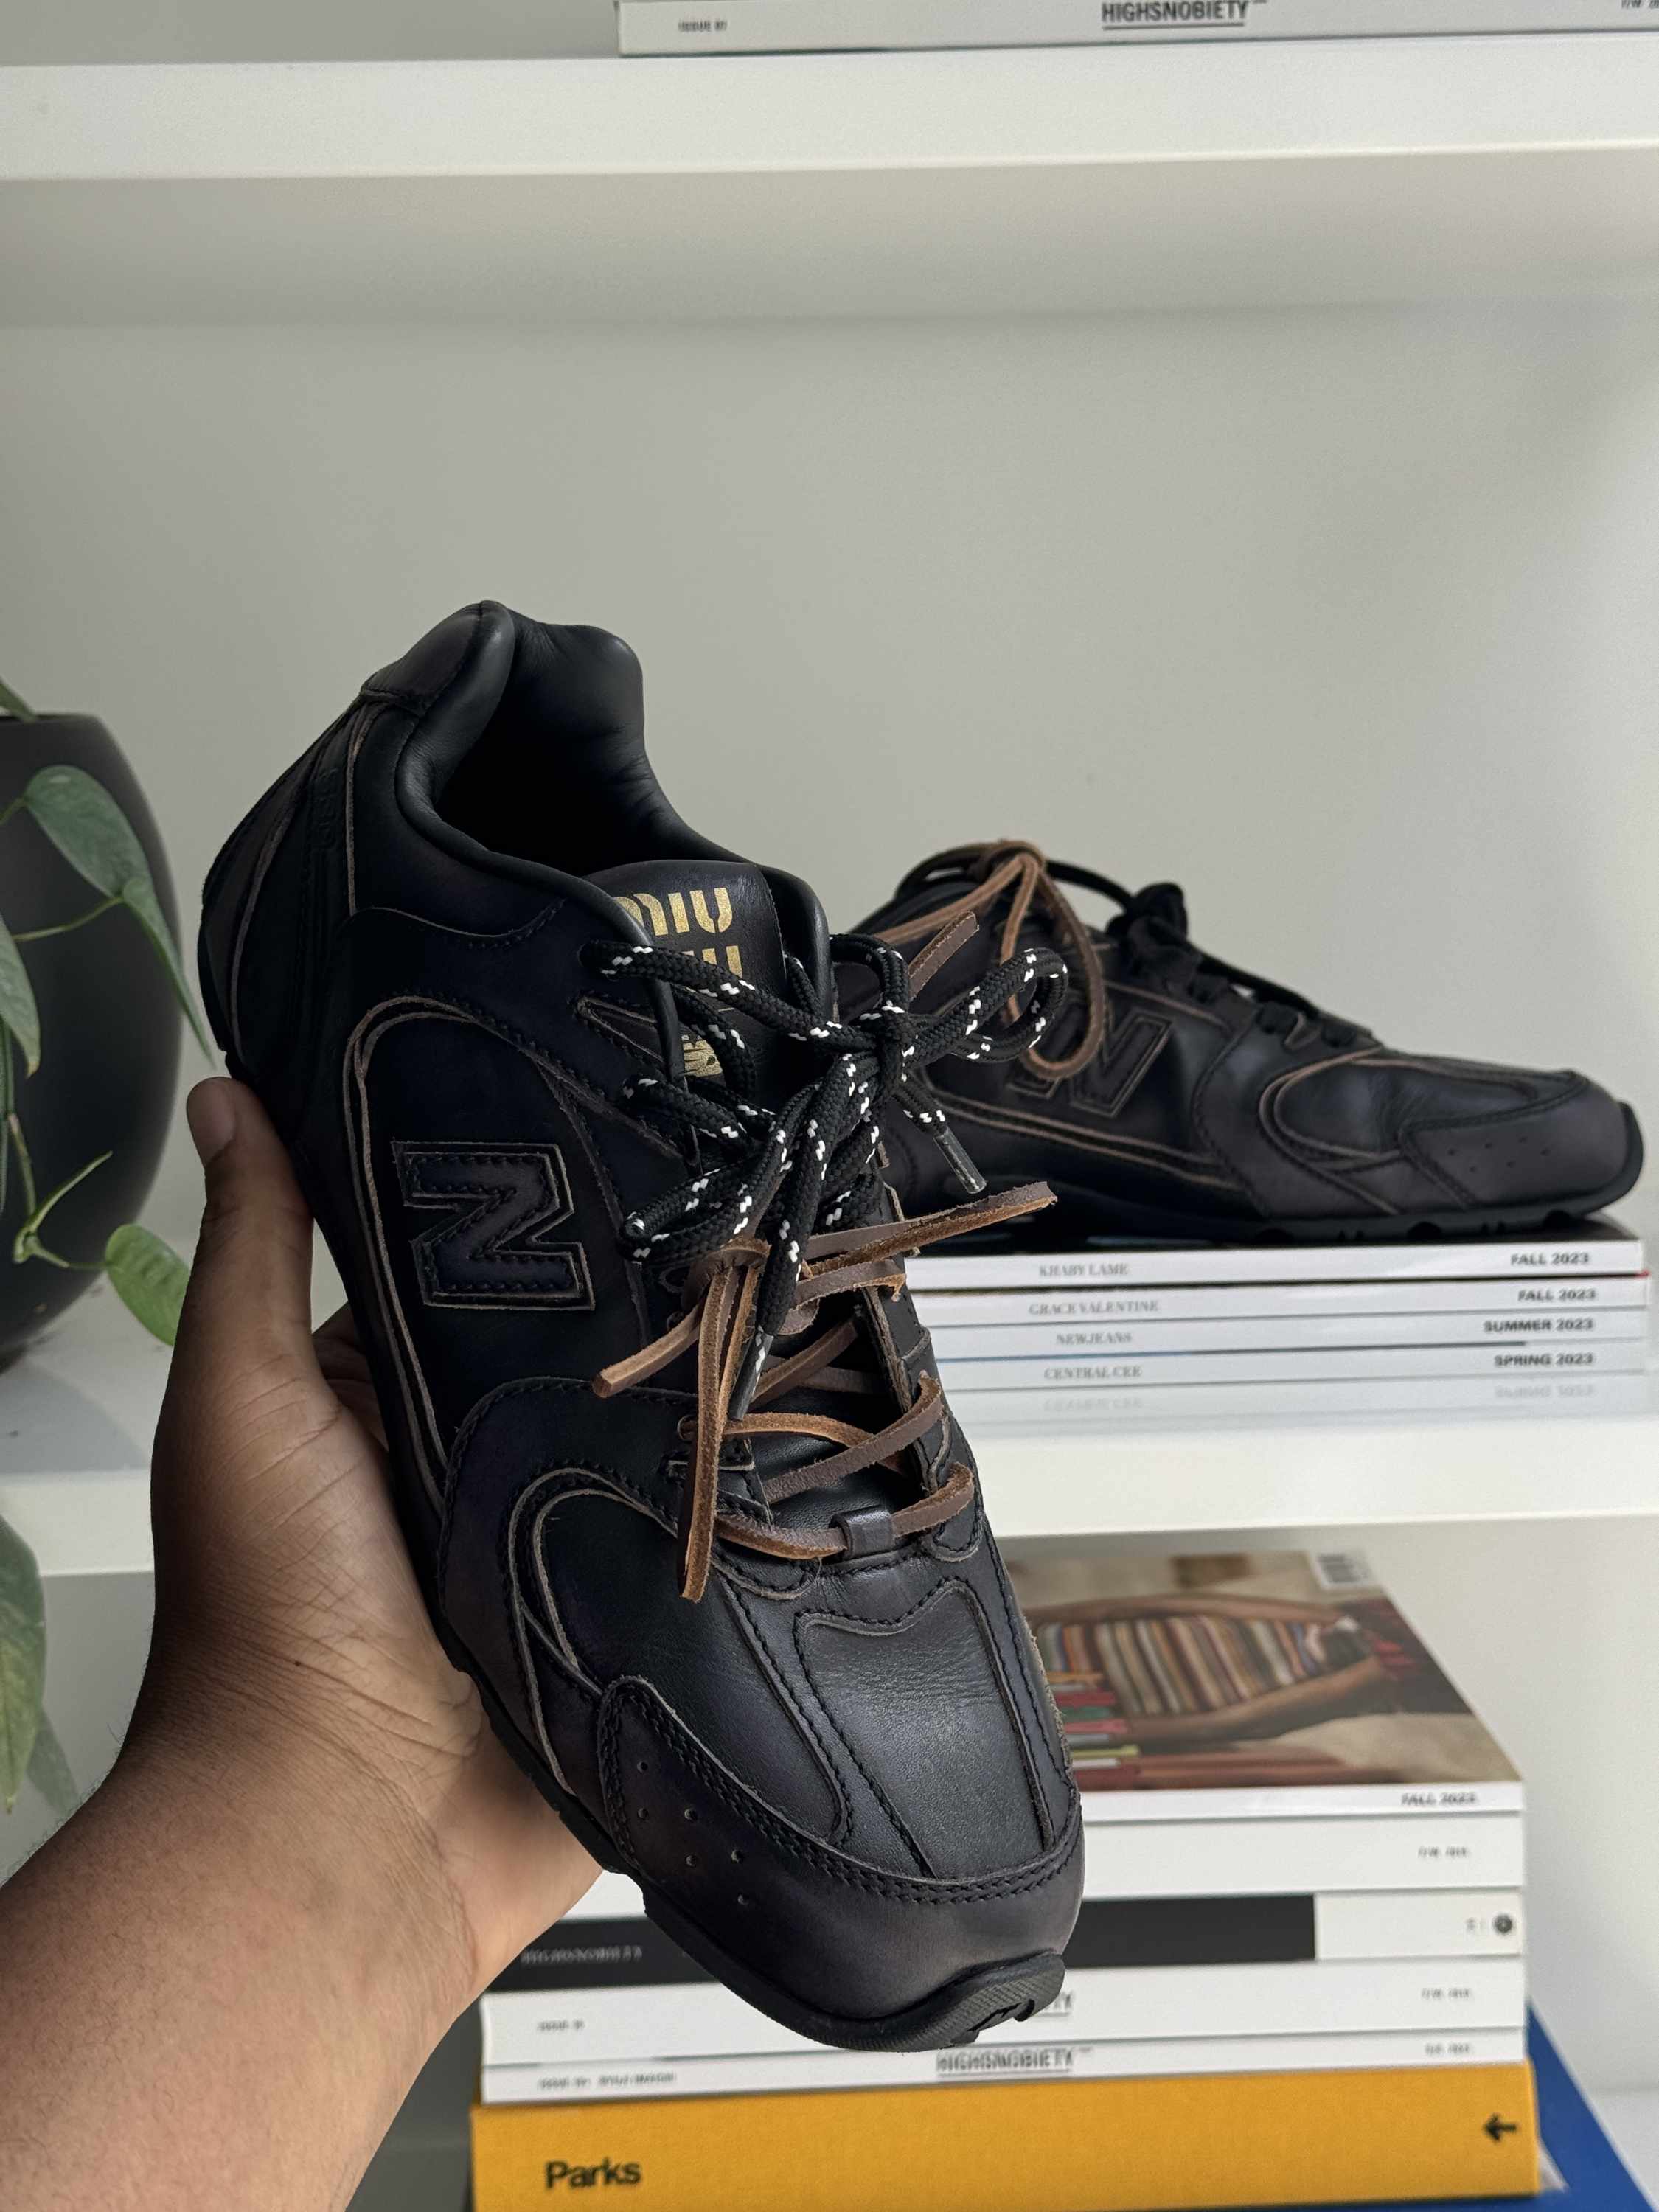 Miu Miu's New Balance 530 sneaker collab in black leather with two laces